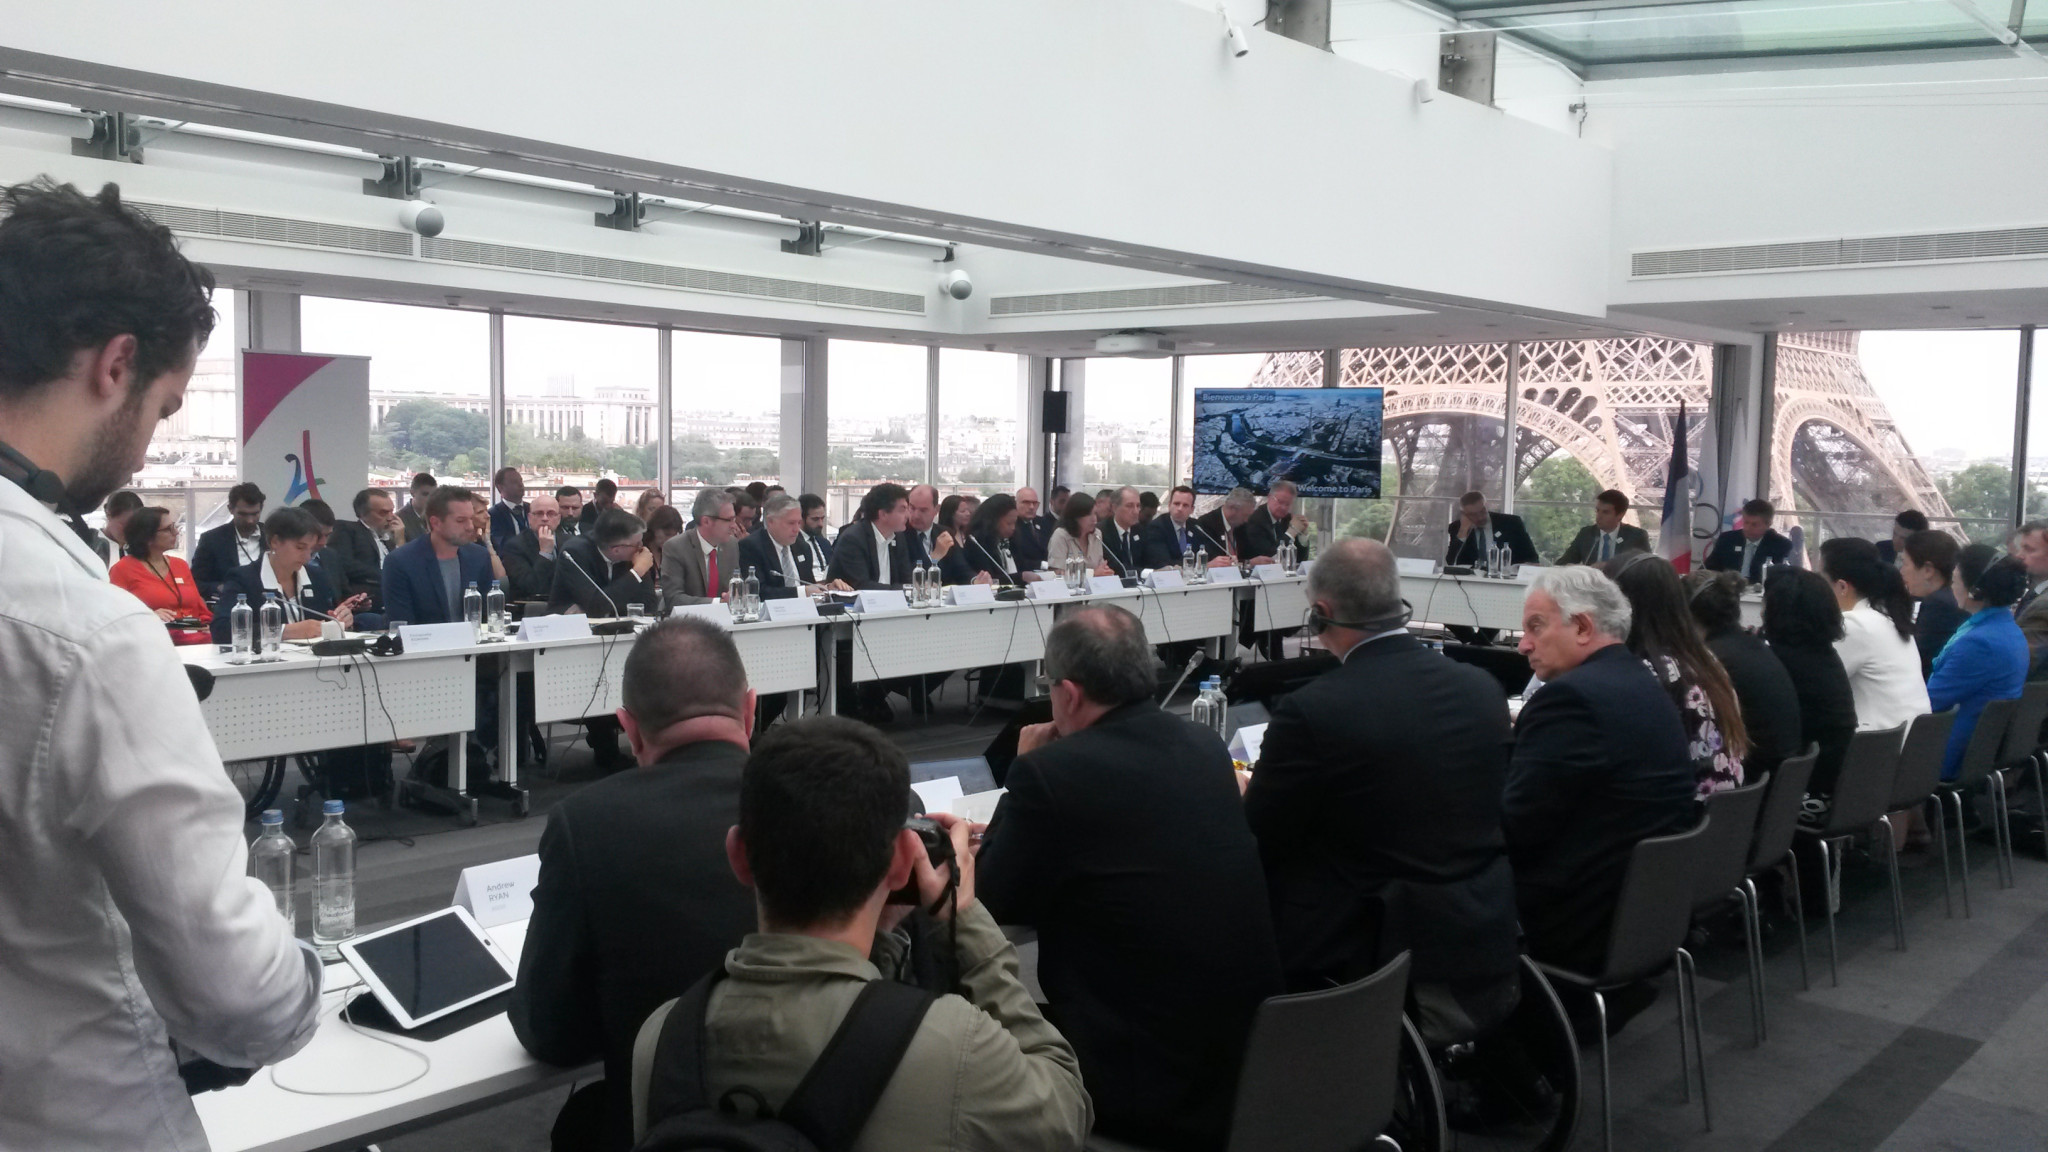 IOC Coordination Commission members and Paris 2024 representatives hold a morning meeting in the panoramic conference room at the top of the Hotel Pullman Paris Tour Eiffel ©ITG